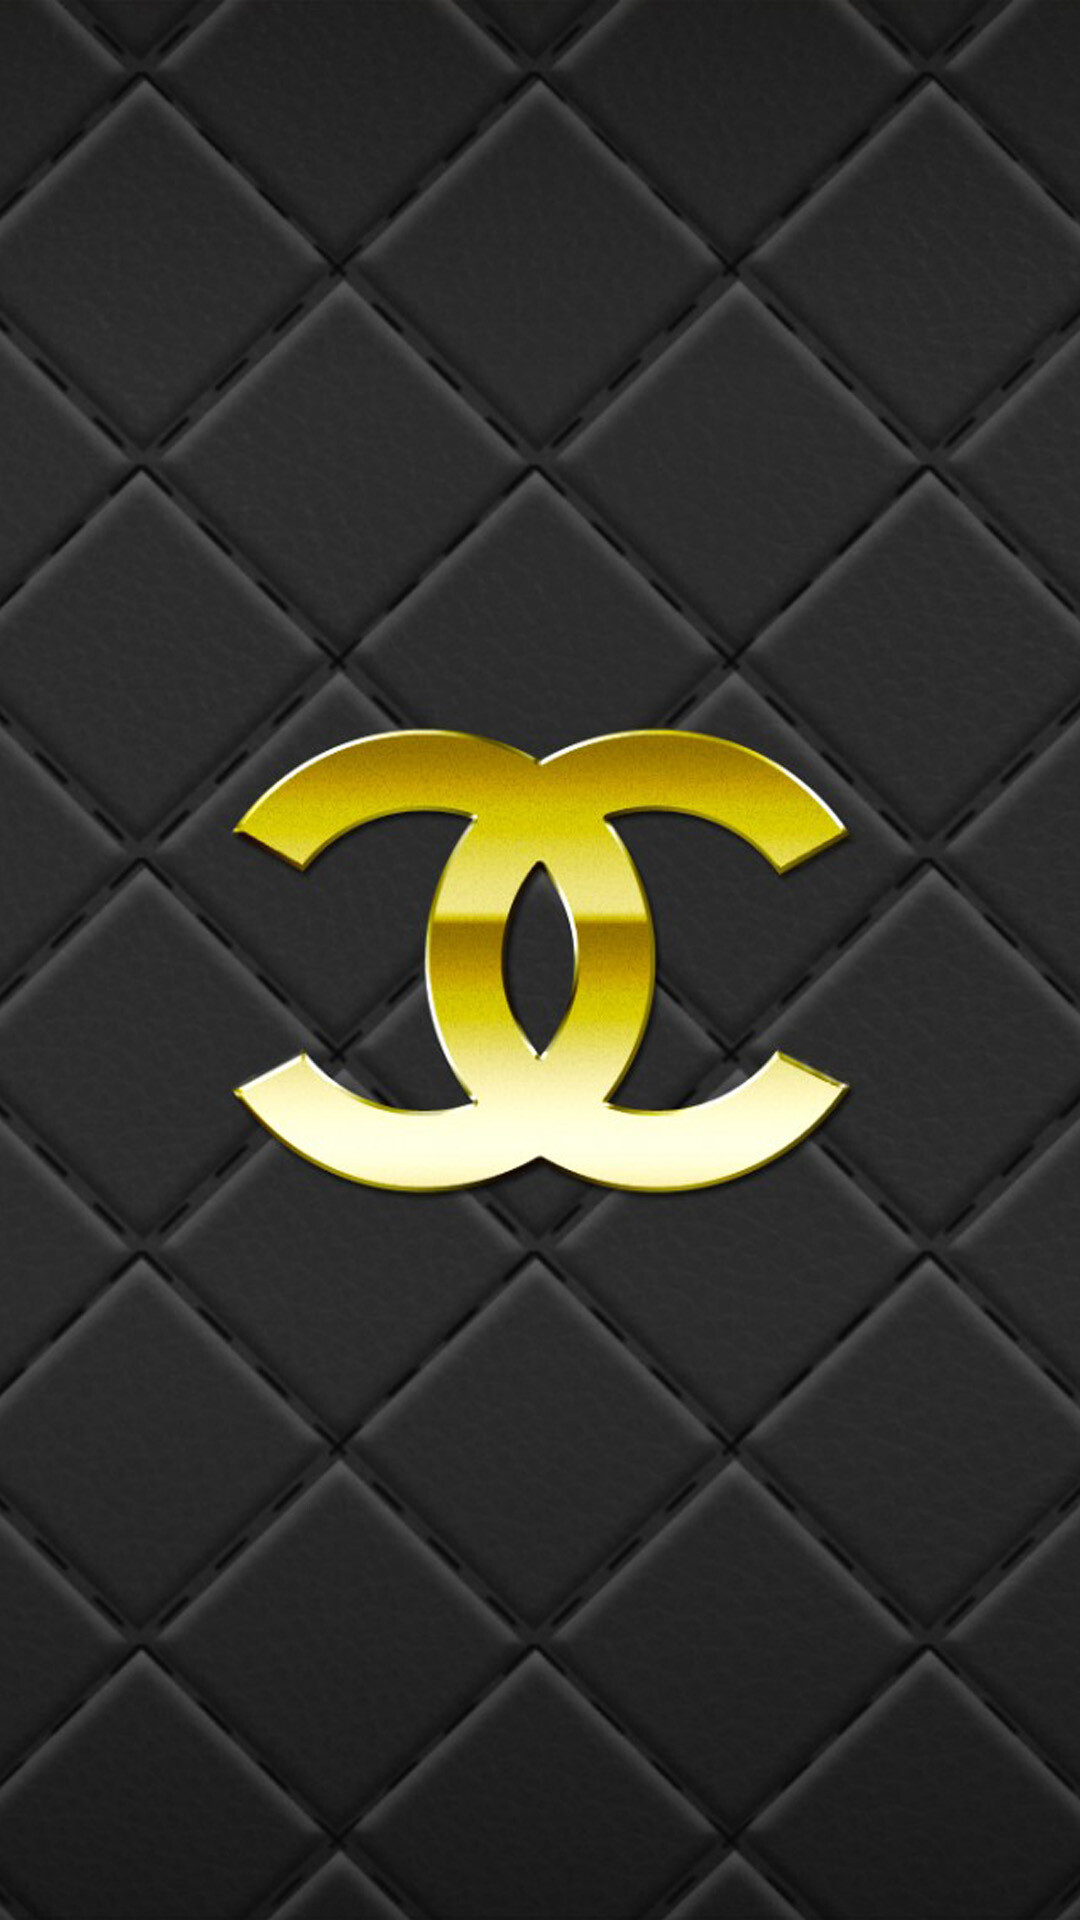 Chanel fashion, Chanel iPhone wallpapers, High definition, Fashion aesthetics, 1080x1920 Full HD Phone